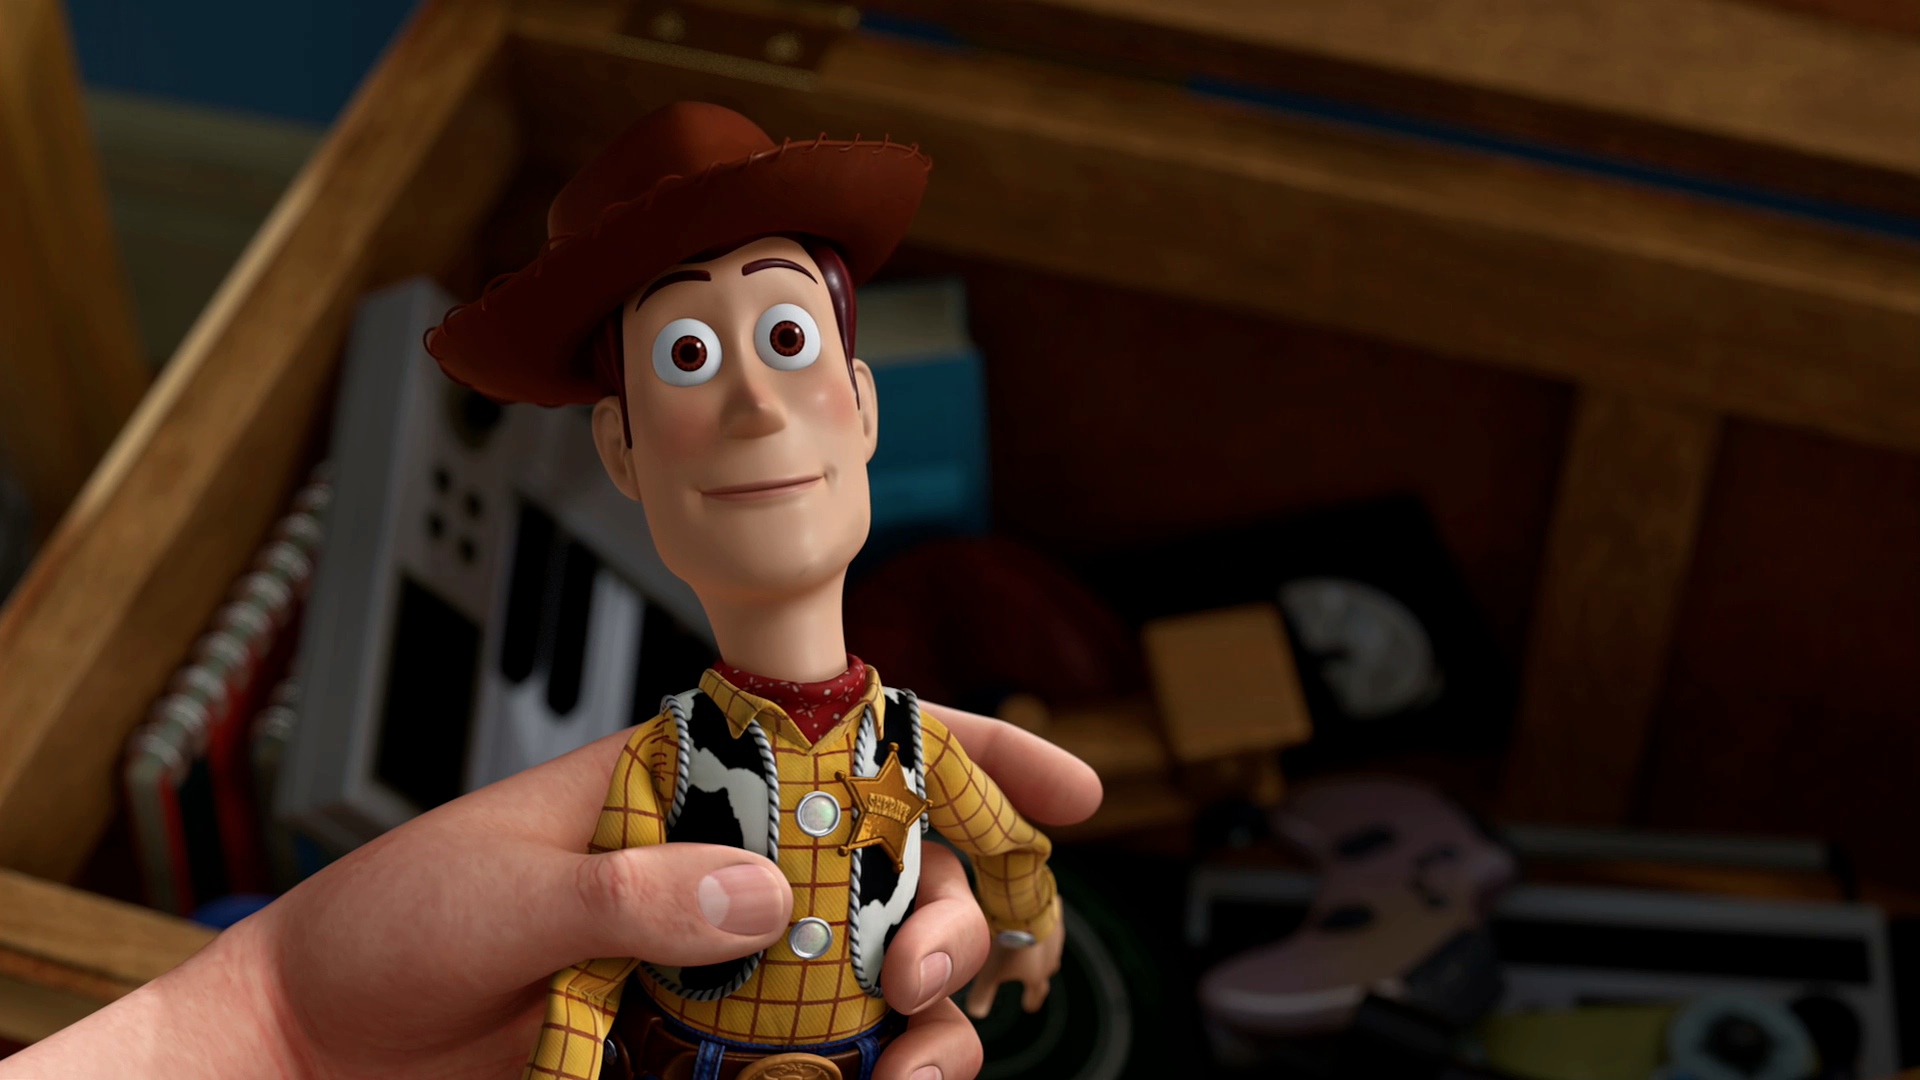 Woody Toy Story 1920x1080